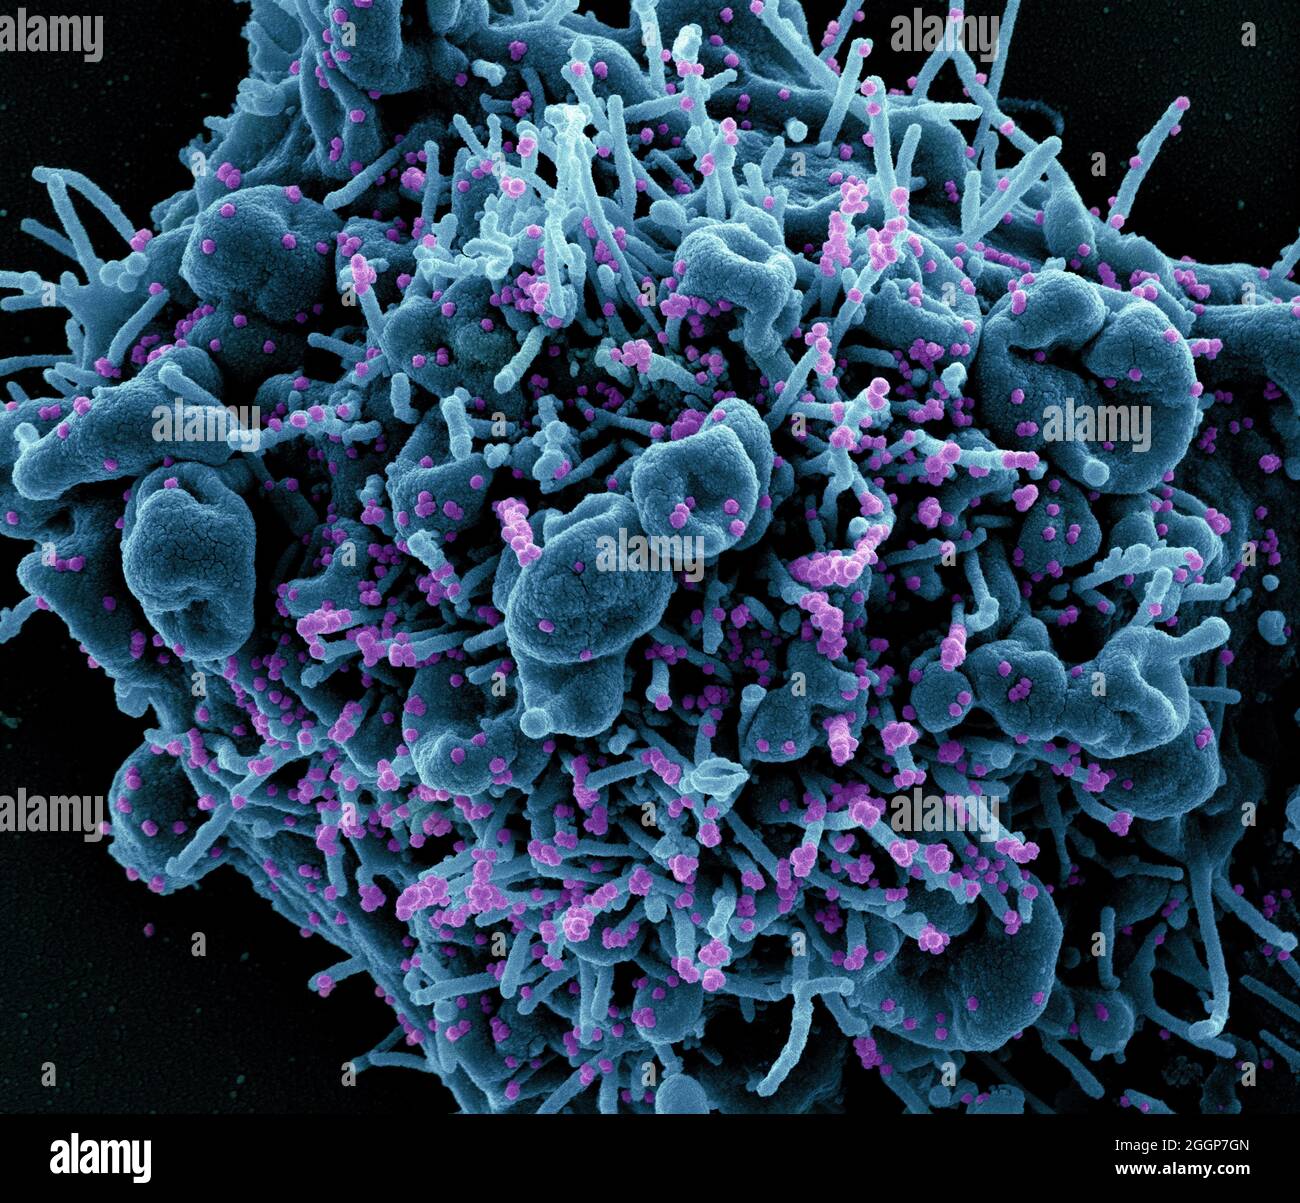 Colorized scanning electron micrograph of an apoptotic cell (teal) infected with SARS-COV-2 virus particles (purple), isolated from a patient sample. Stock Photo